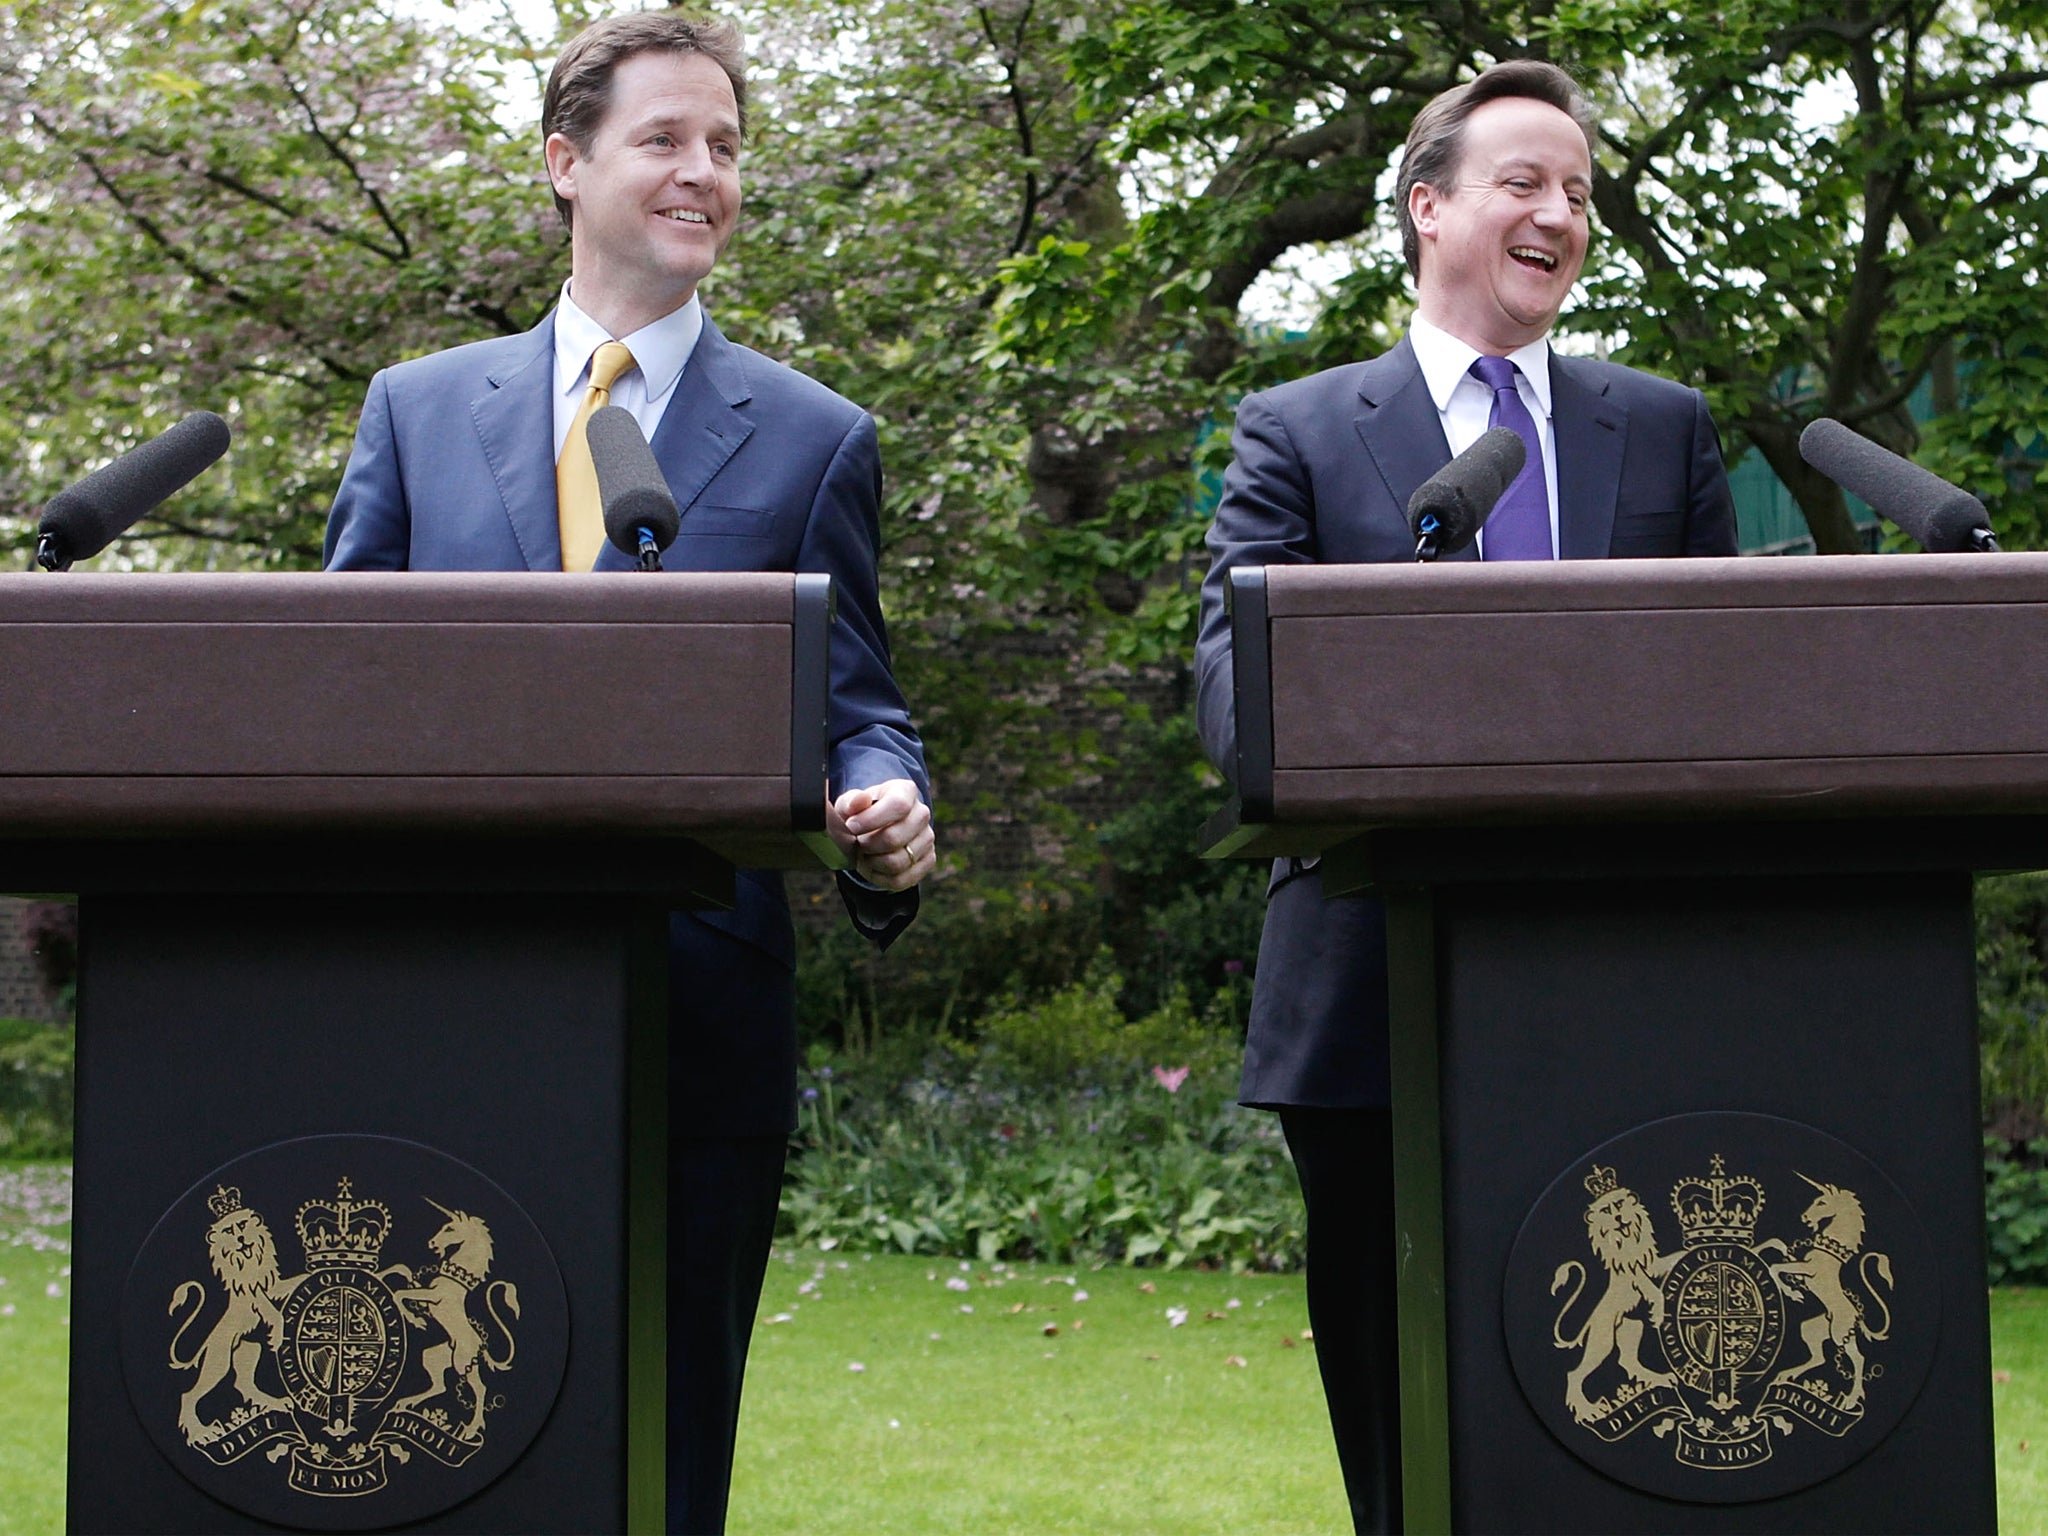 Nick Clegg and David Cameron: Their ties showed party colours, but the PM and his deputy otherwise matched outfits in the heady days of the Coalition honeymoon. They wore navy suits during their garden press conference in 2010, but have taken more individual approaches since.